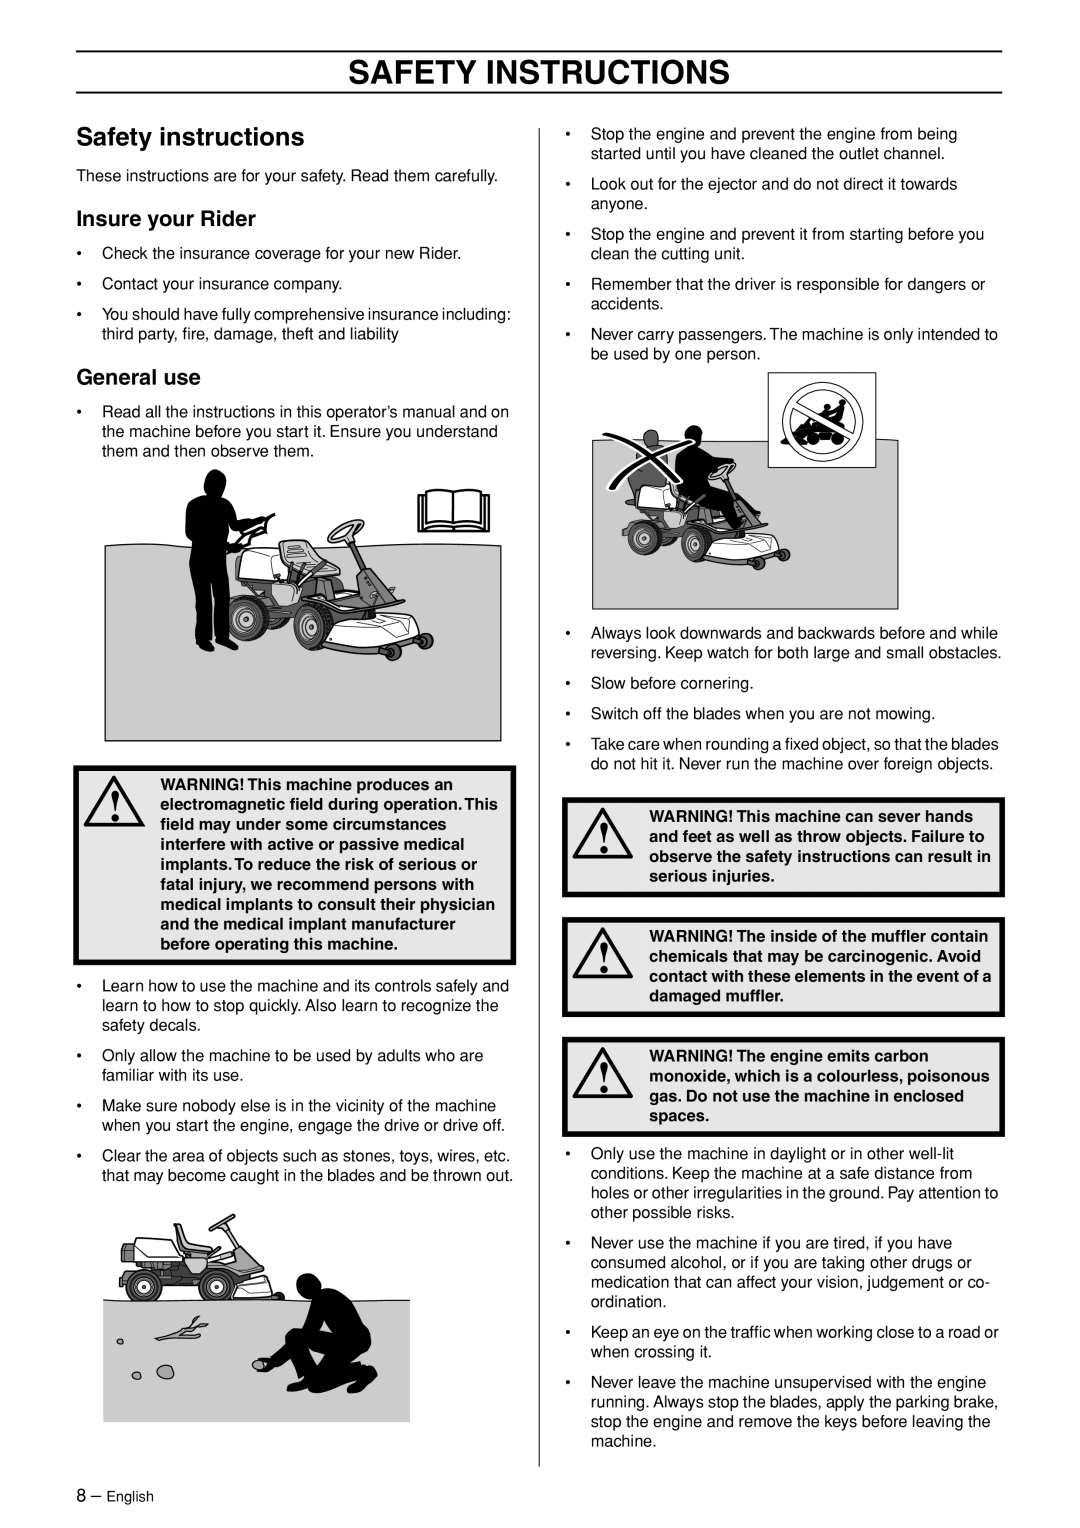 Husqvarna 318 Safety Instructions, Safety instructions, Insure your Rider, General use, WARNING! This machine produces an 